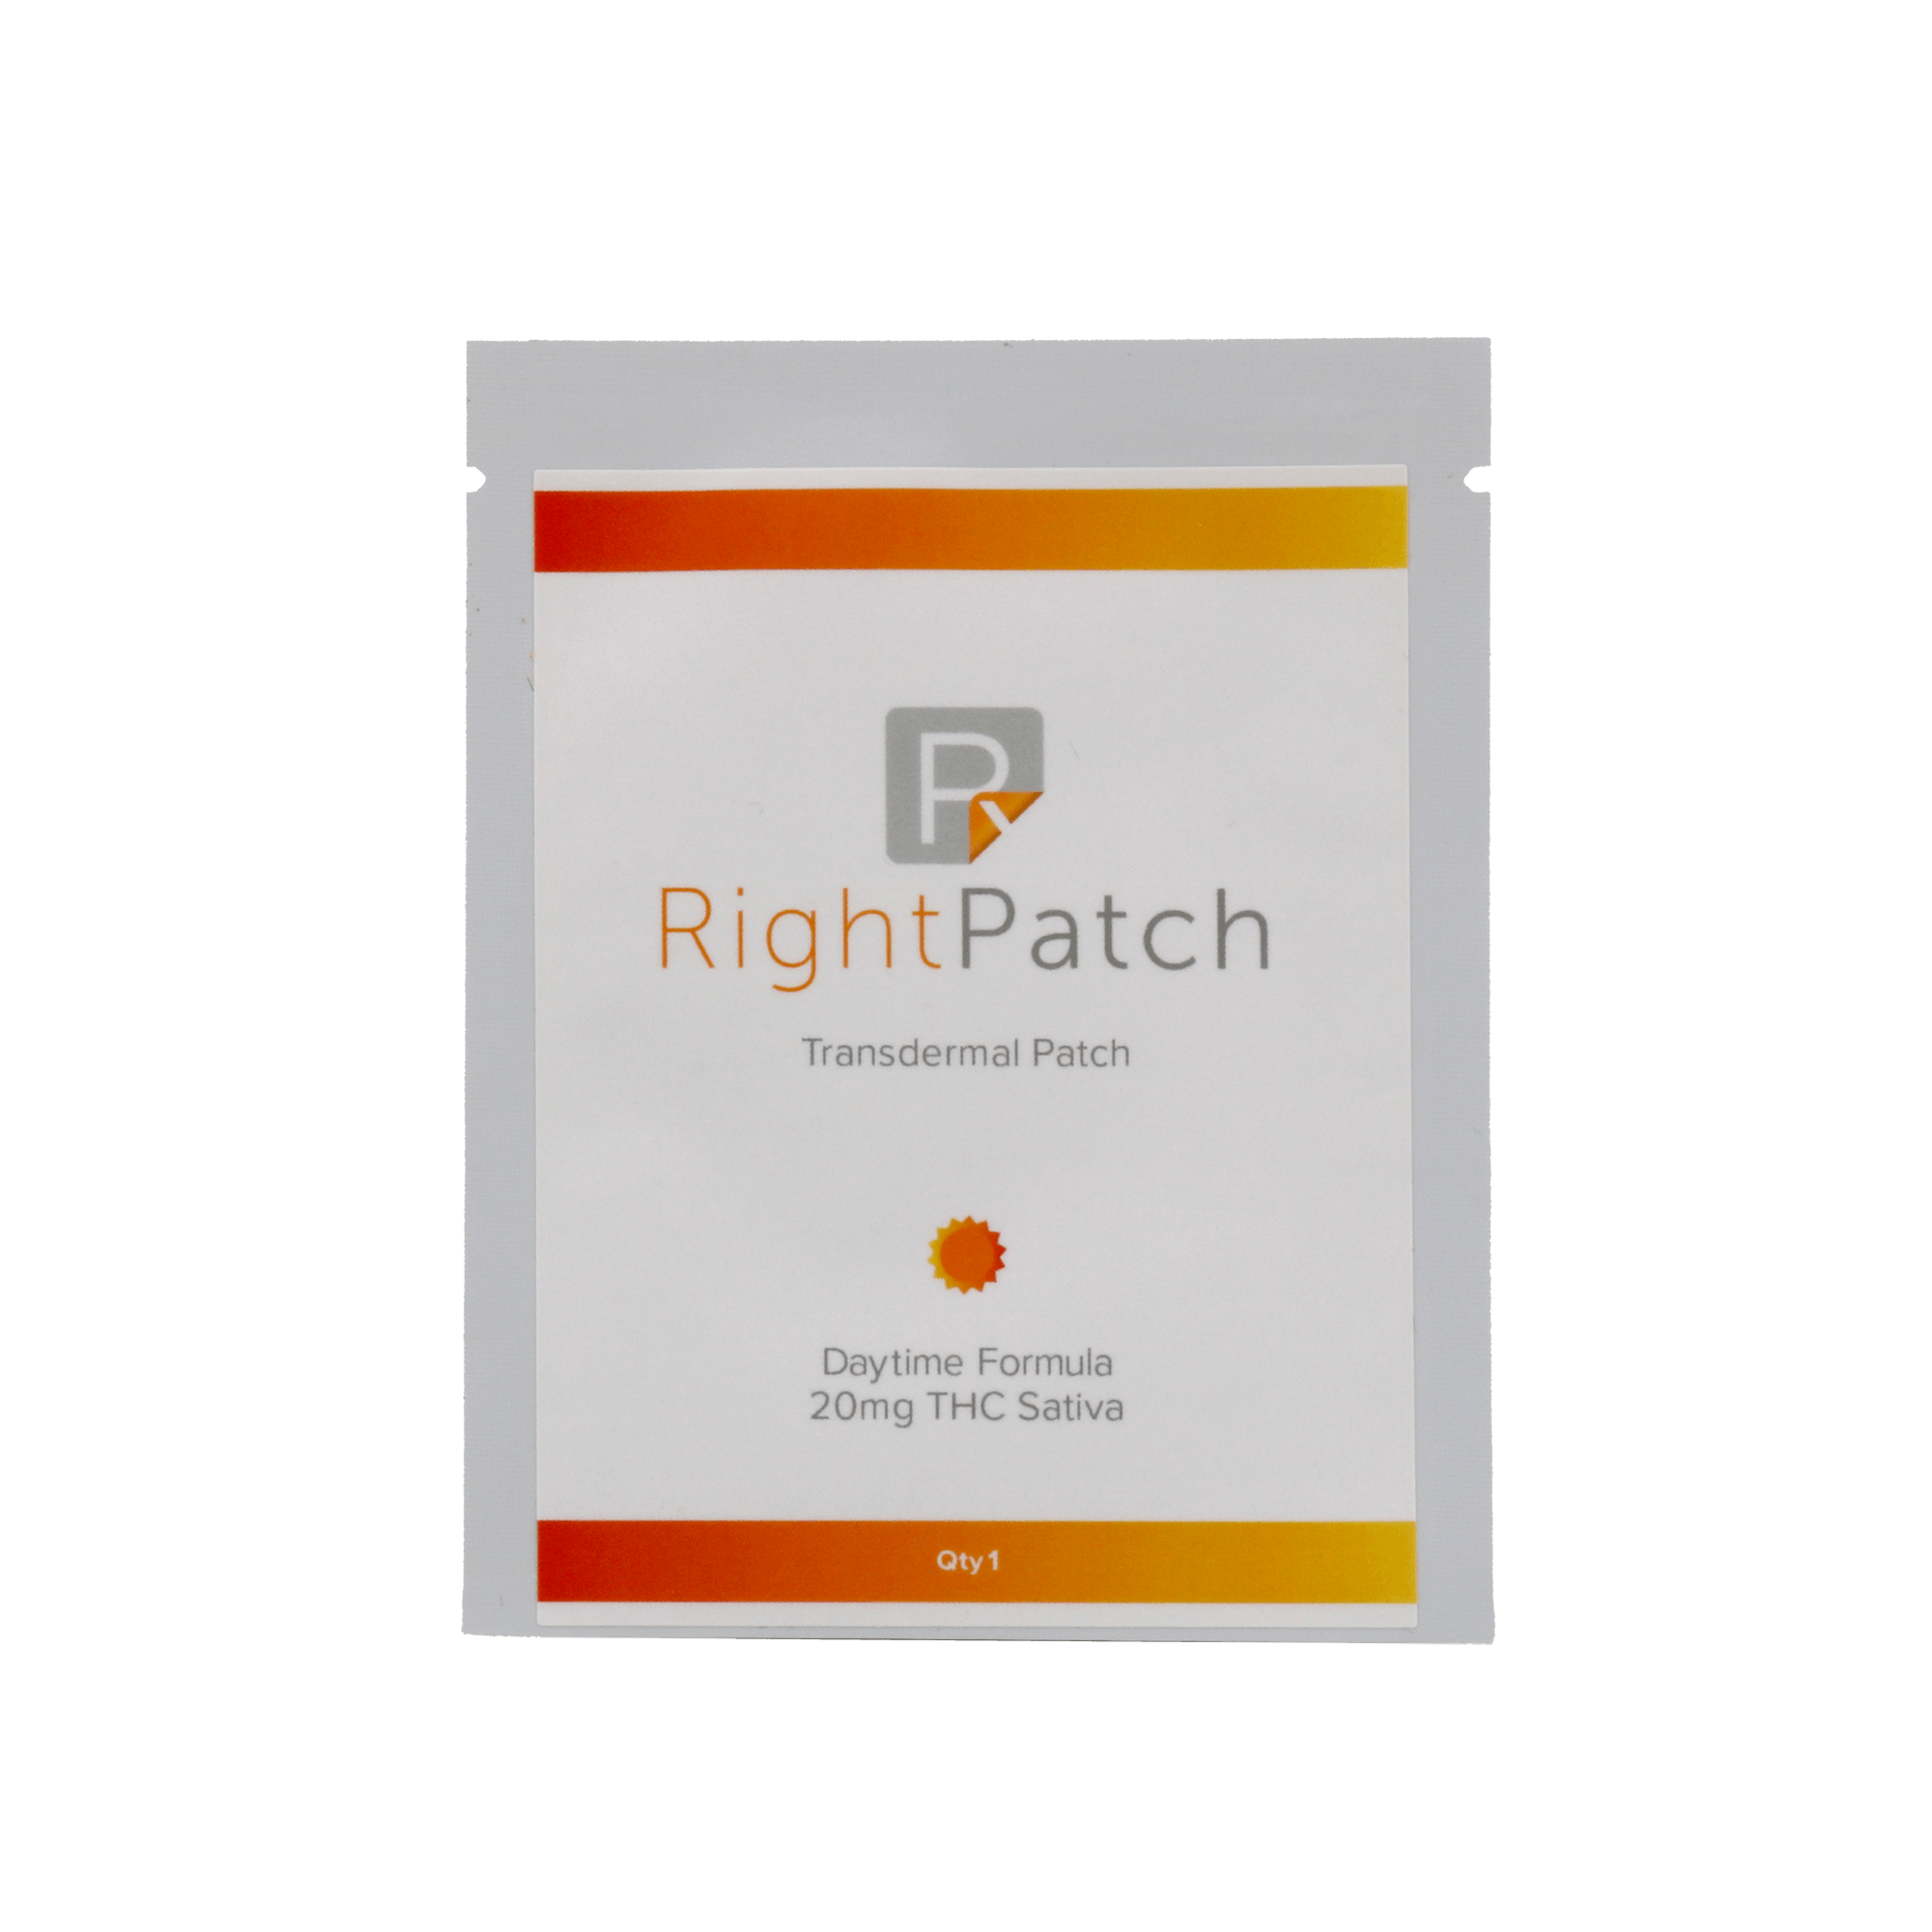 topicals-right-patch-daytime-formula-transdermal-patch-sativa-20mg